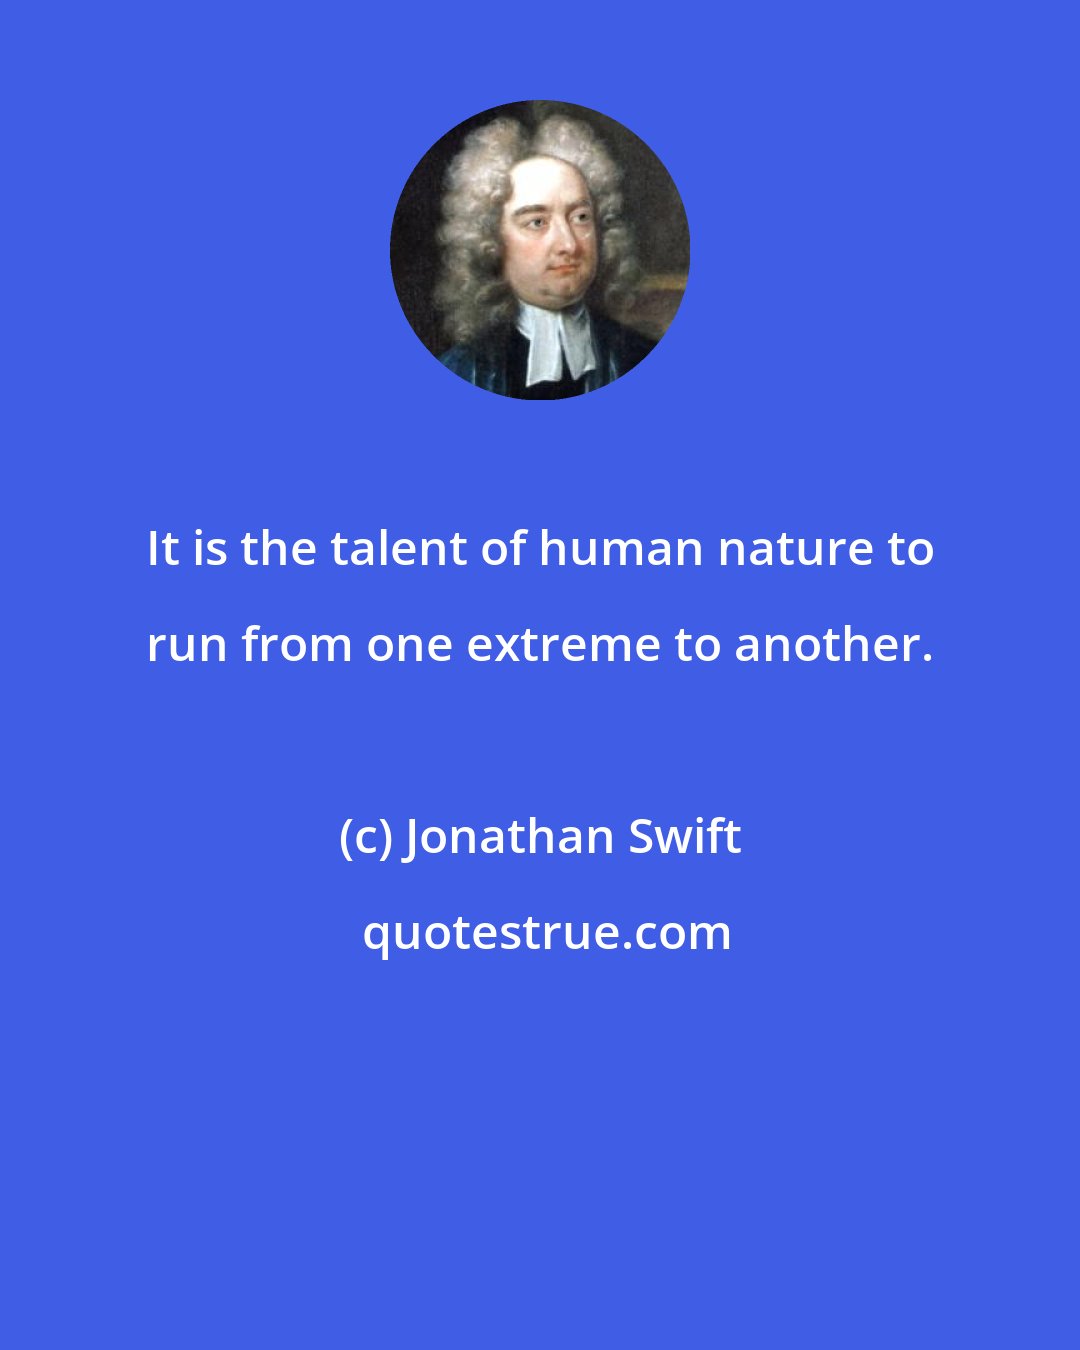 Jonathan Swift: It is the talent of human nature to run from one extreme to another.